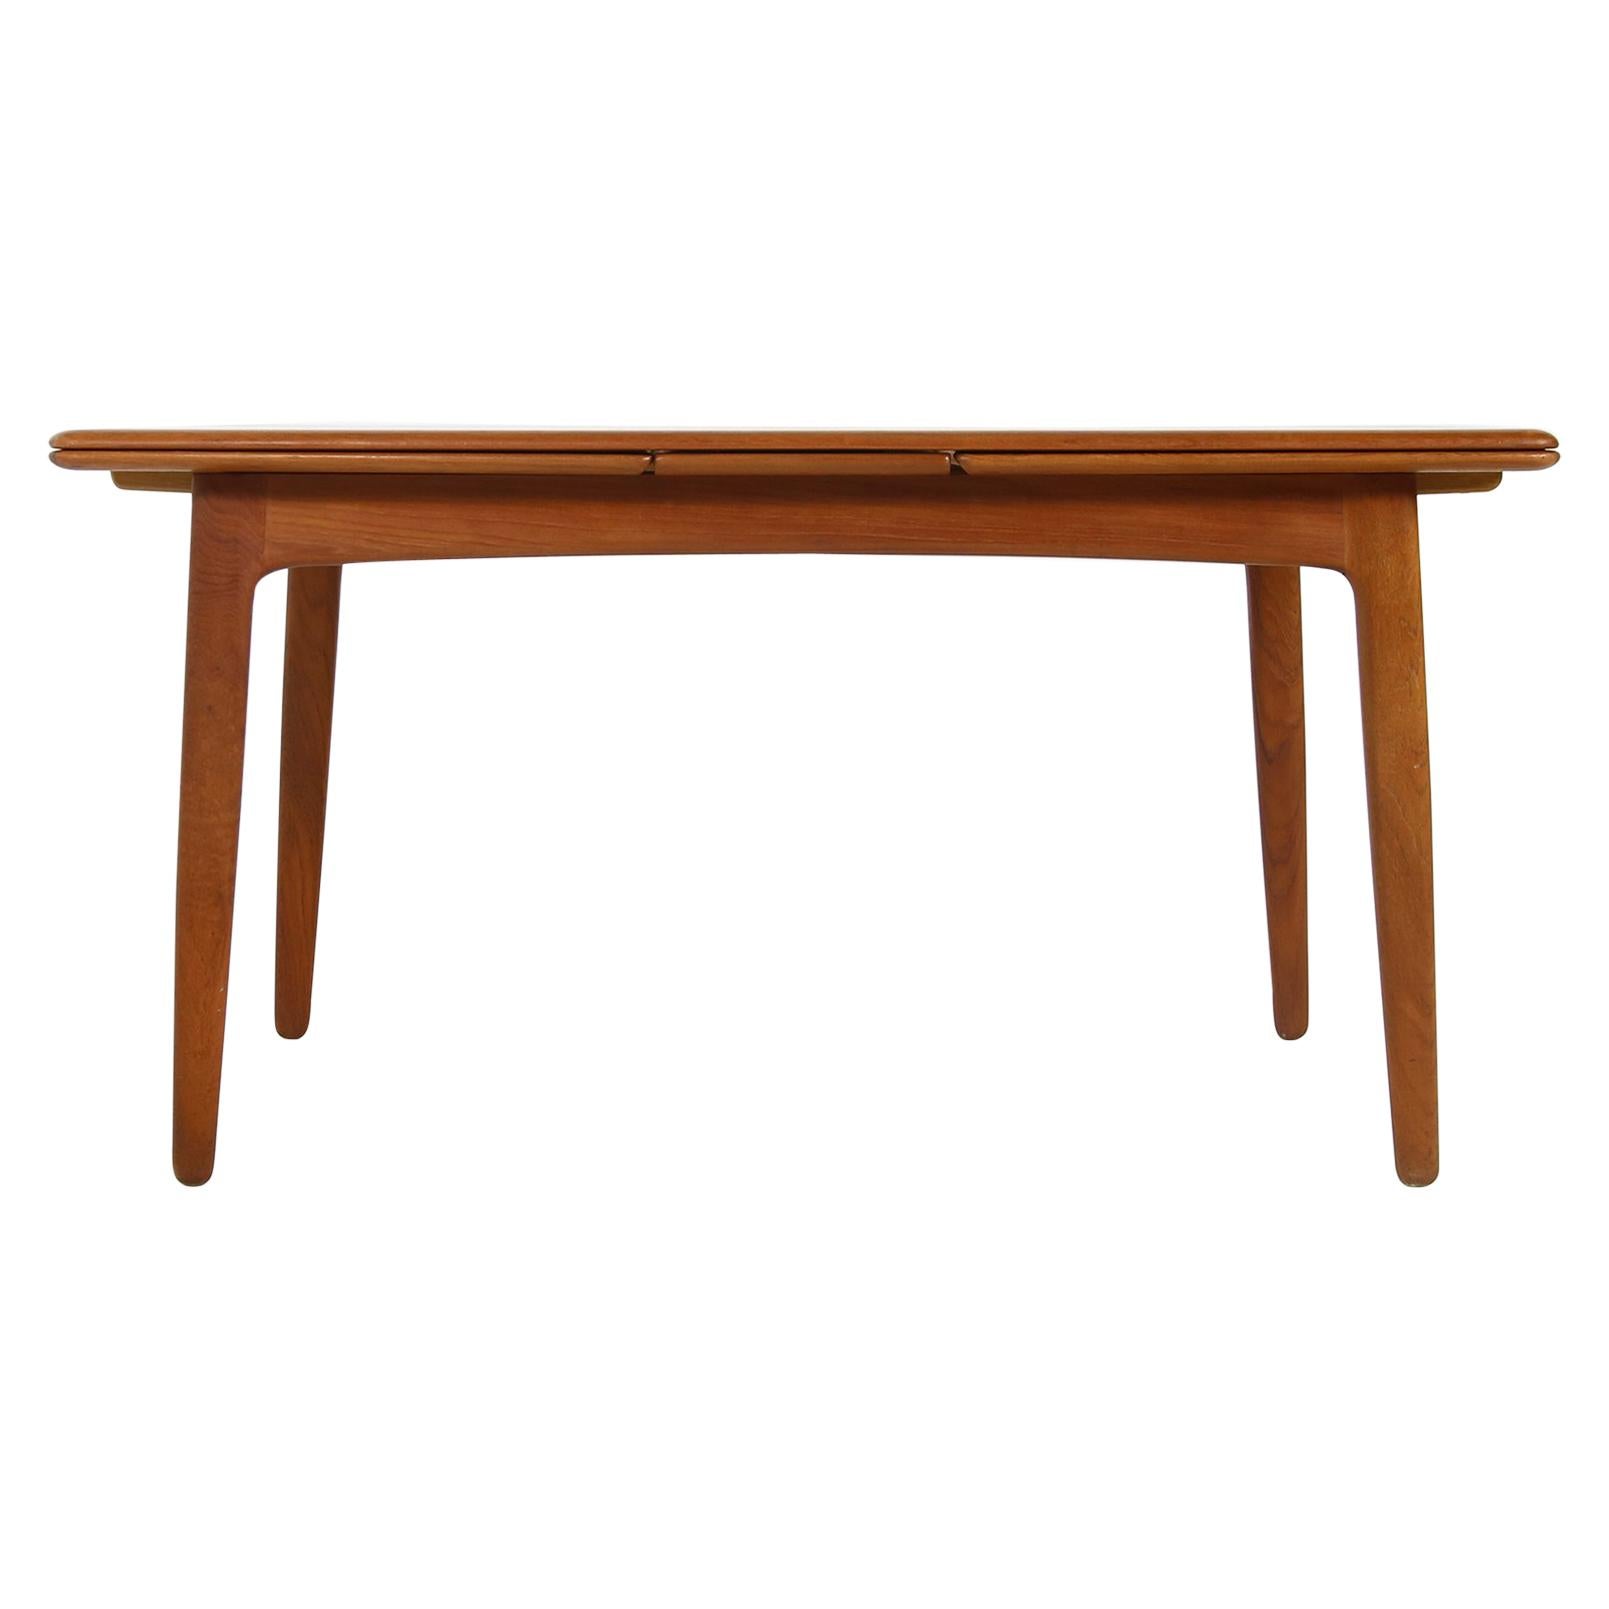 Large 1960s Extendable Teak Dining Table by Svend Aage Madsen, Danish Modern